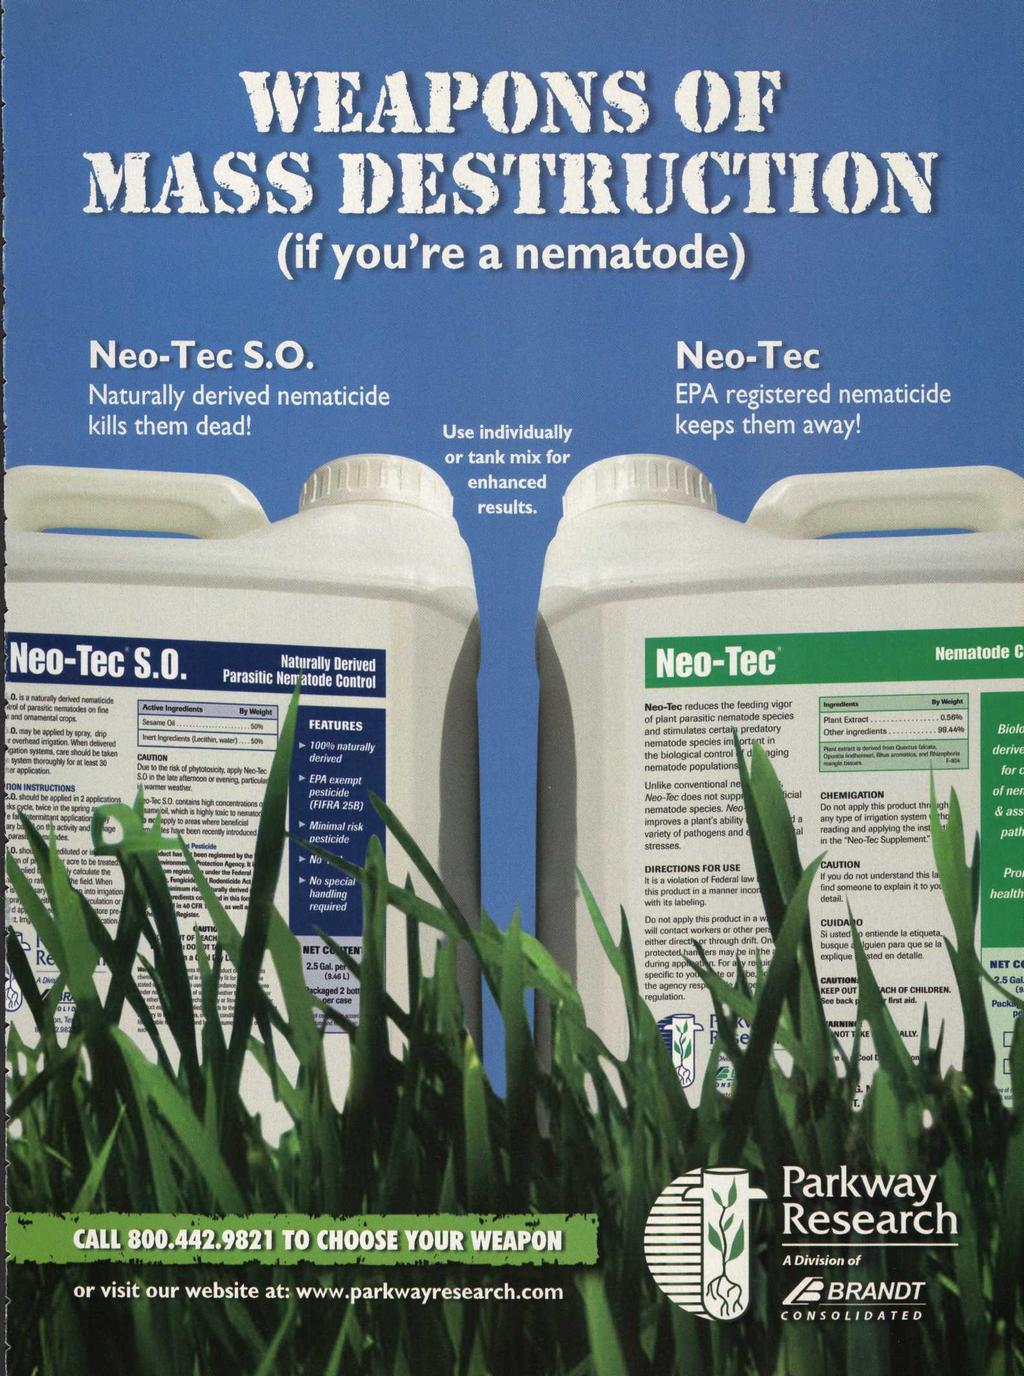 (if you're a nematode) Neo-Tec S.O. Naturally derived nematicide kills them dead! Use individually or tank mix for enhanced results.